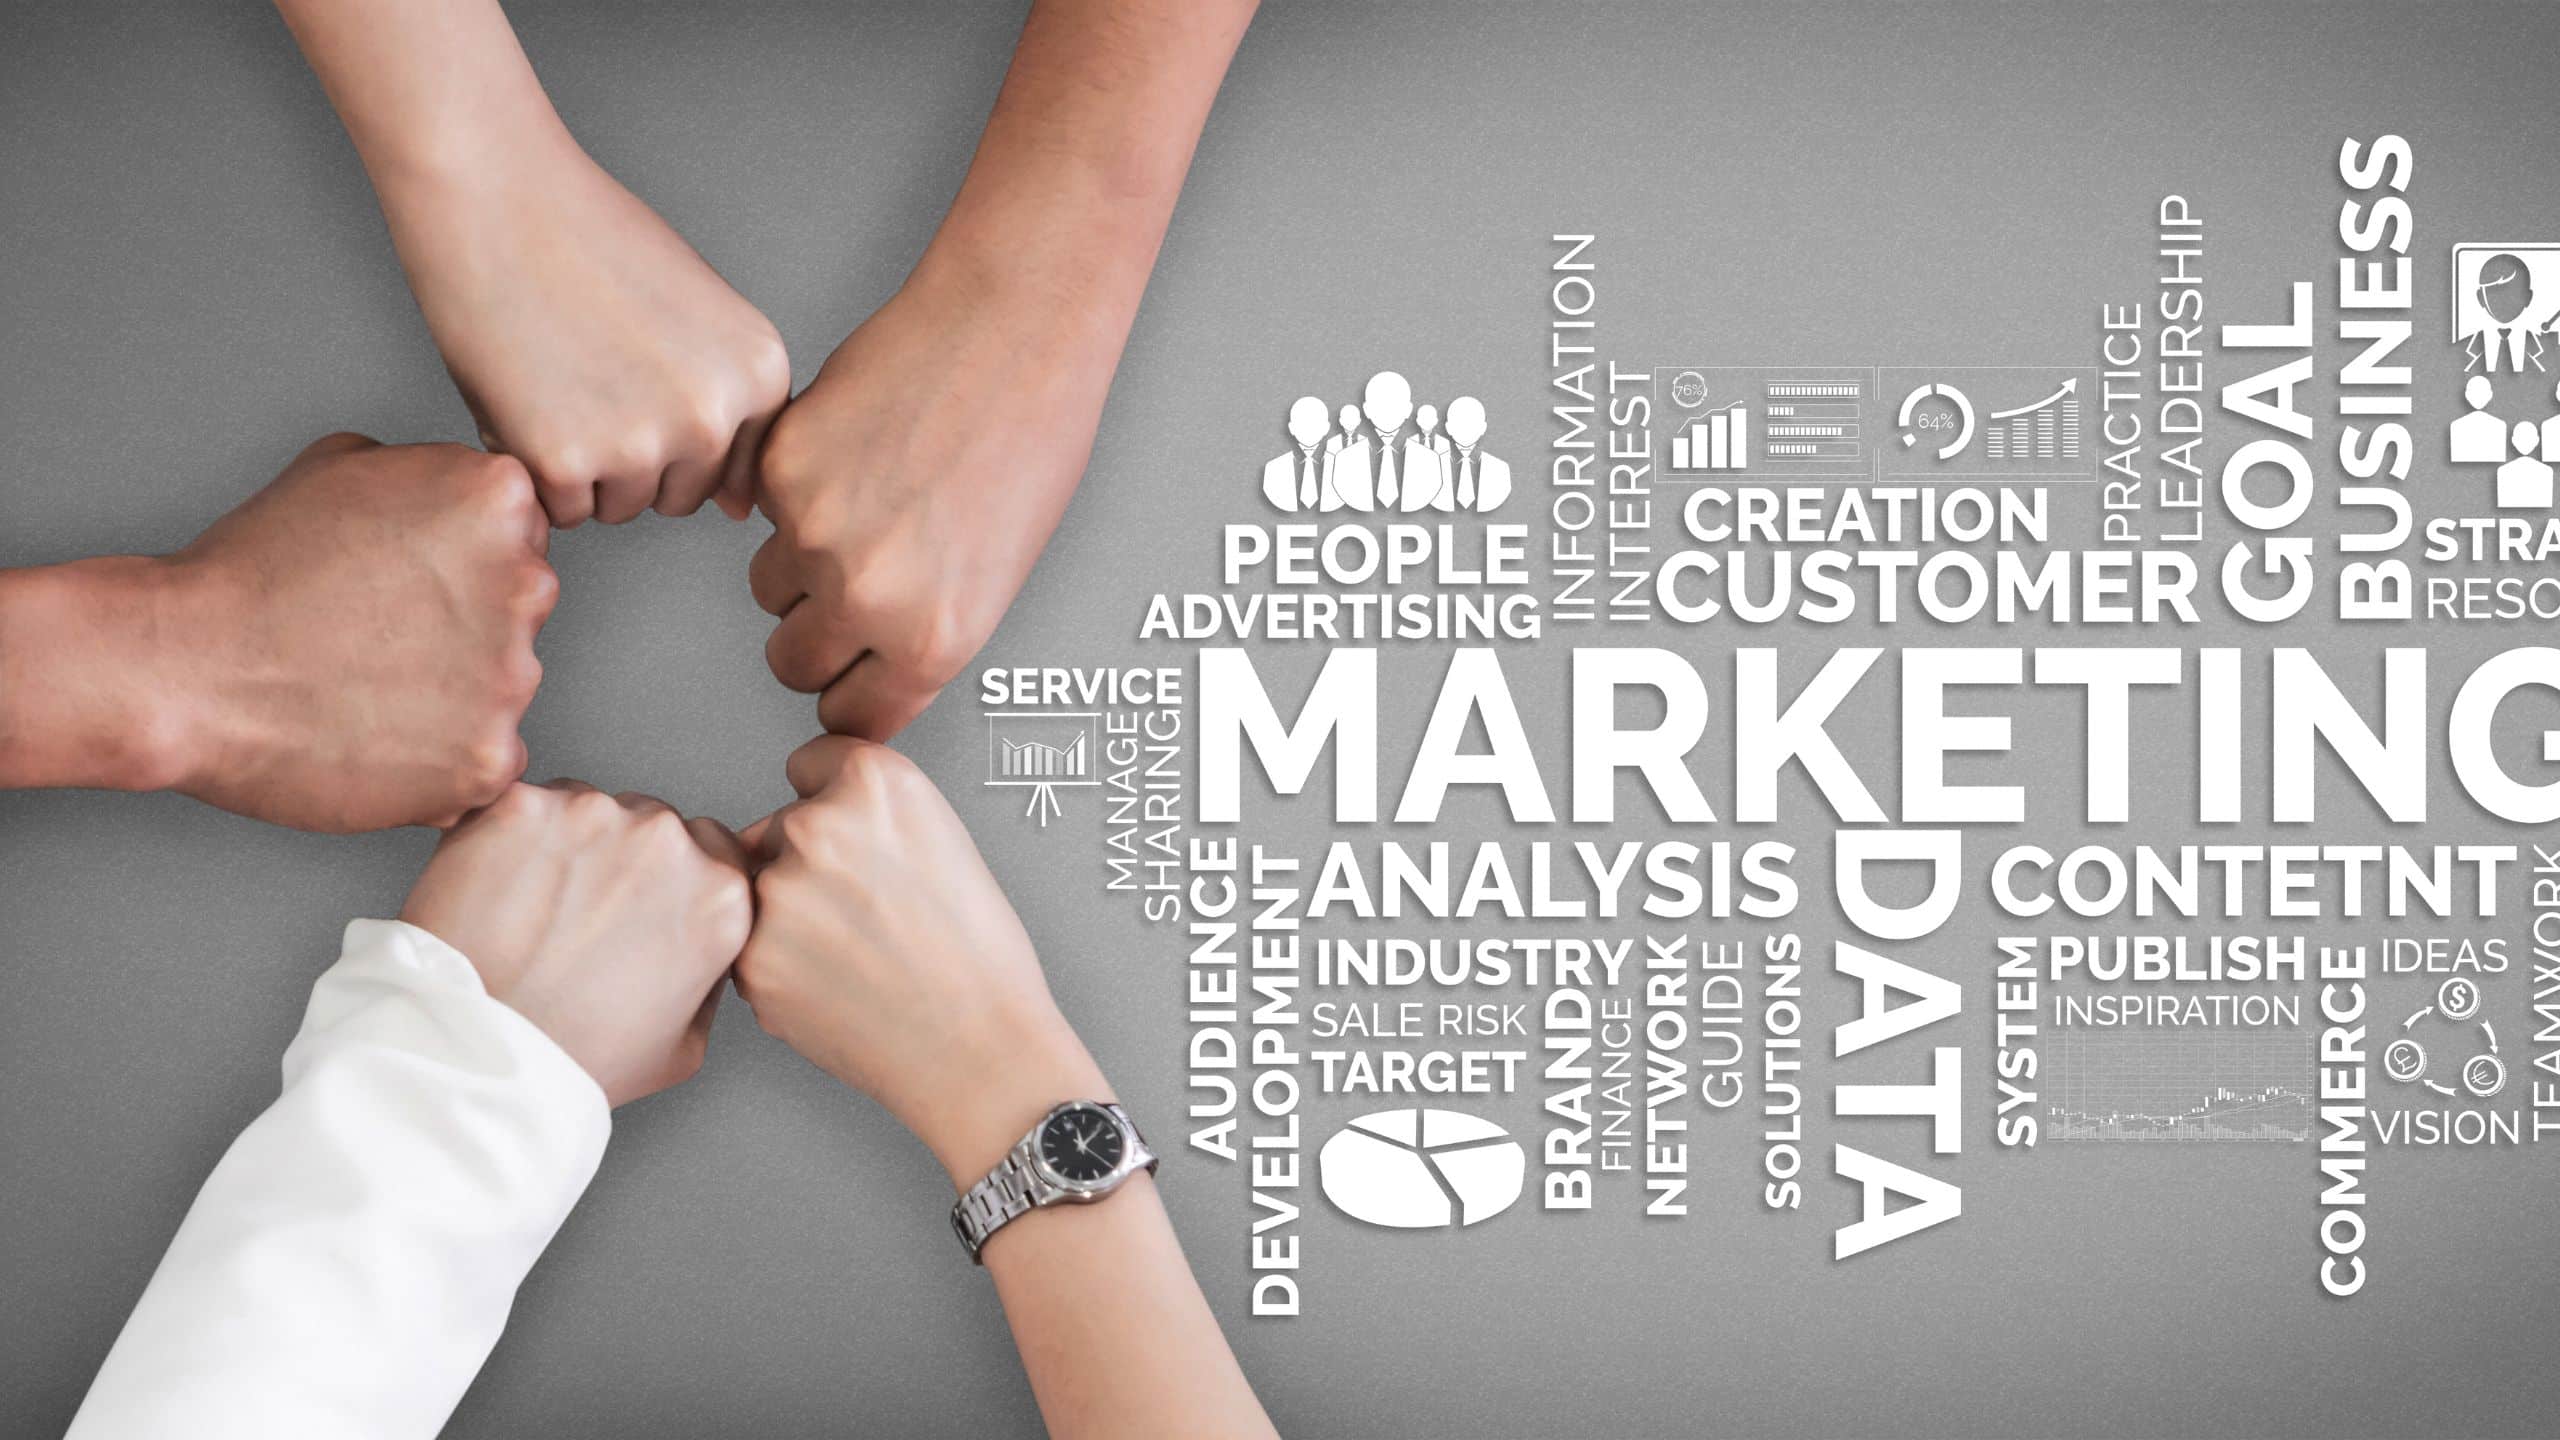 What Does a Digital Marketing Agency Do